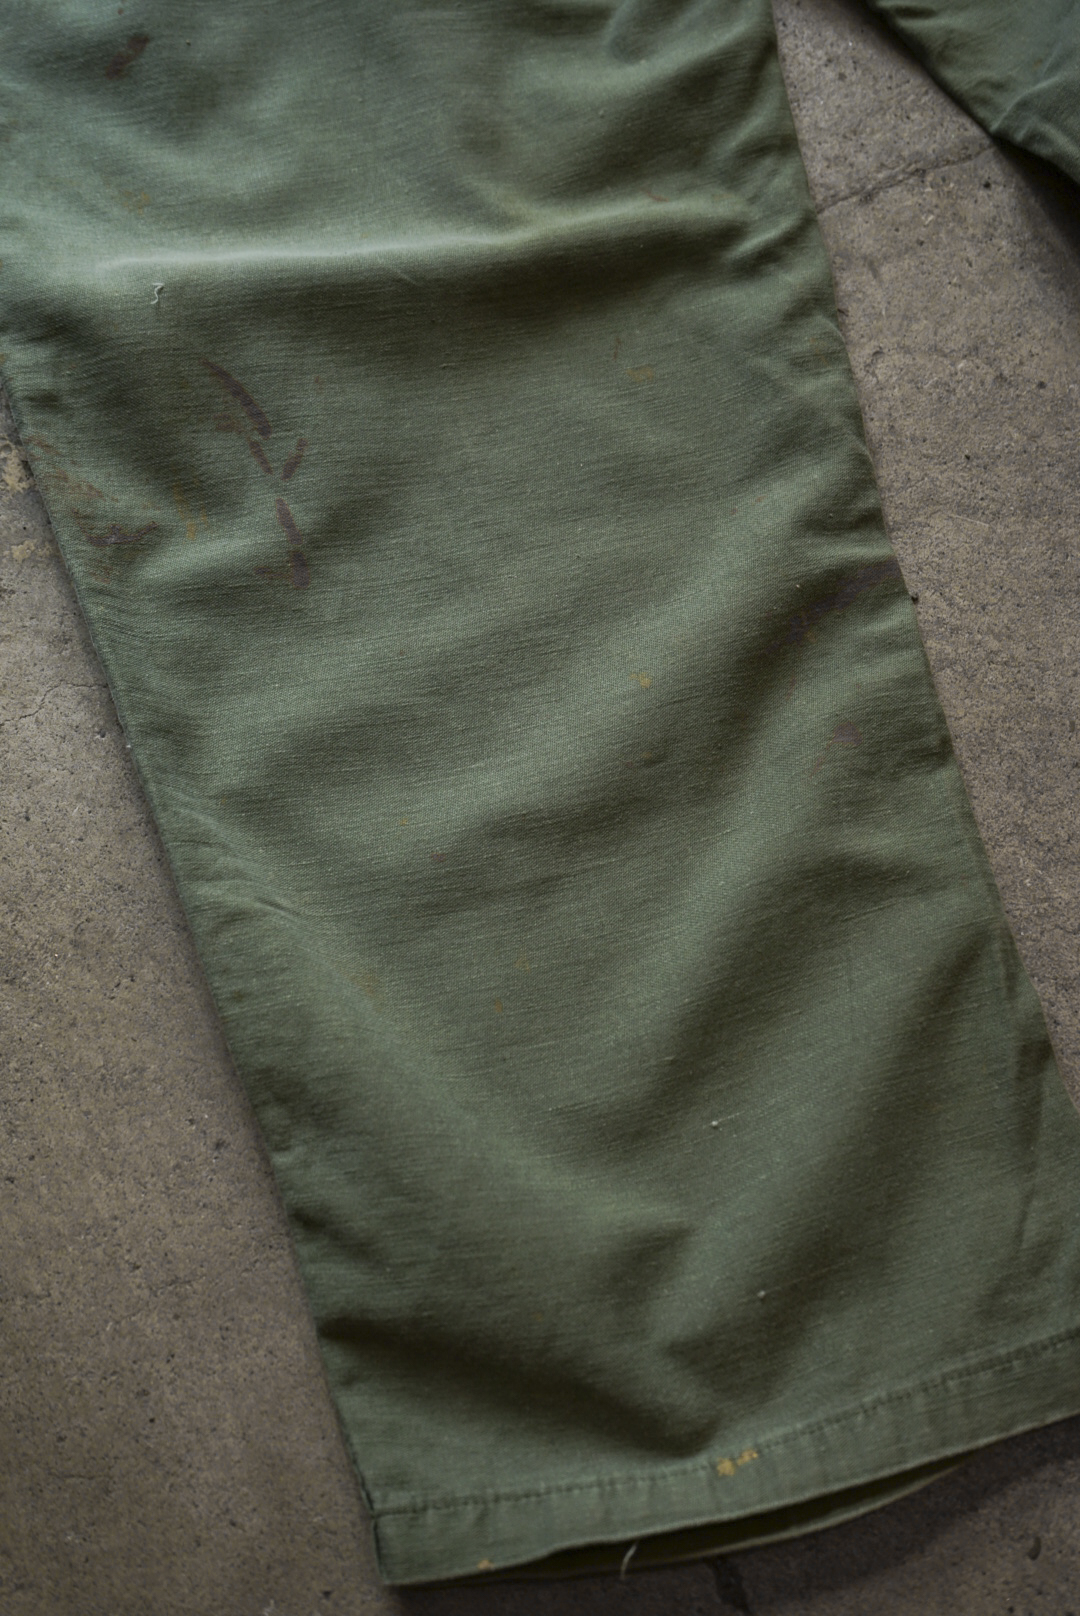 US ARMY BAKER PANTS REPAIRED 02